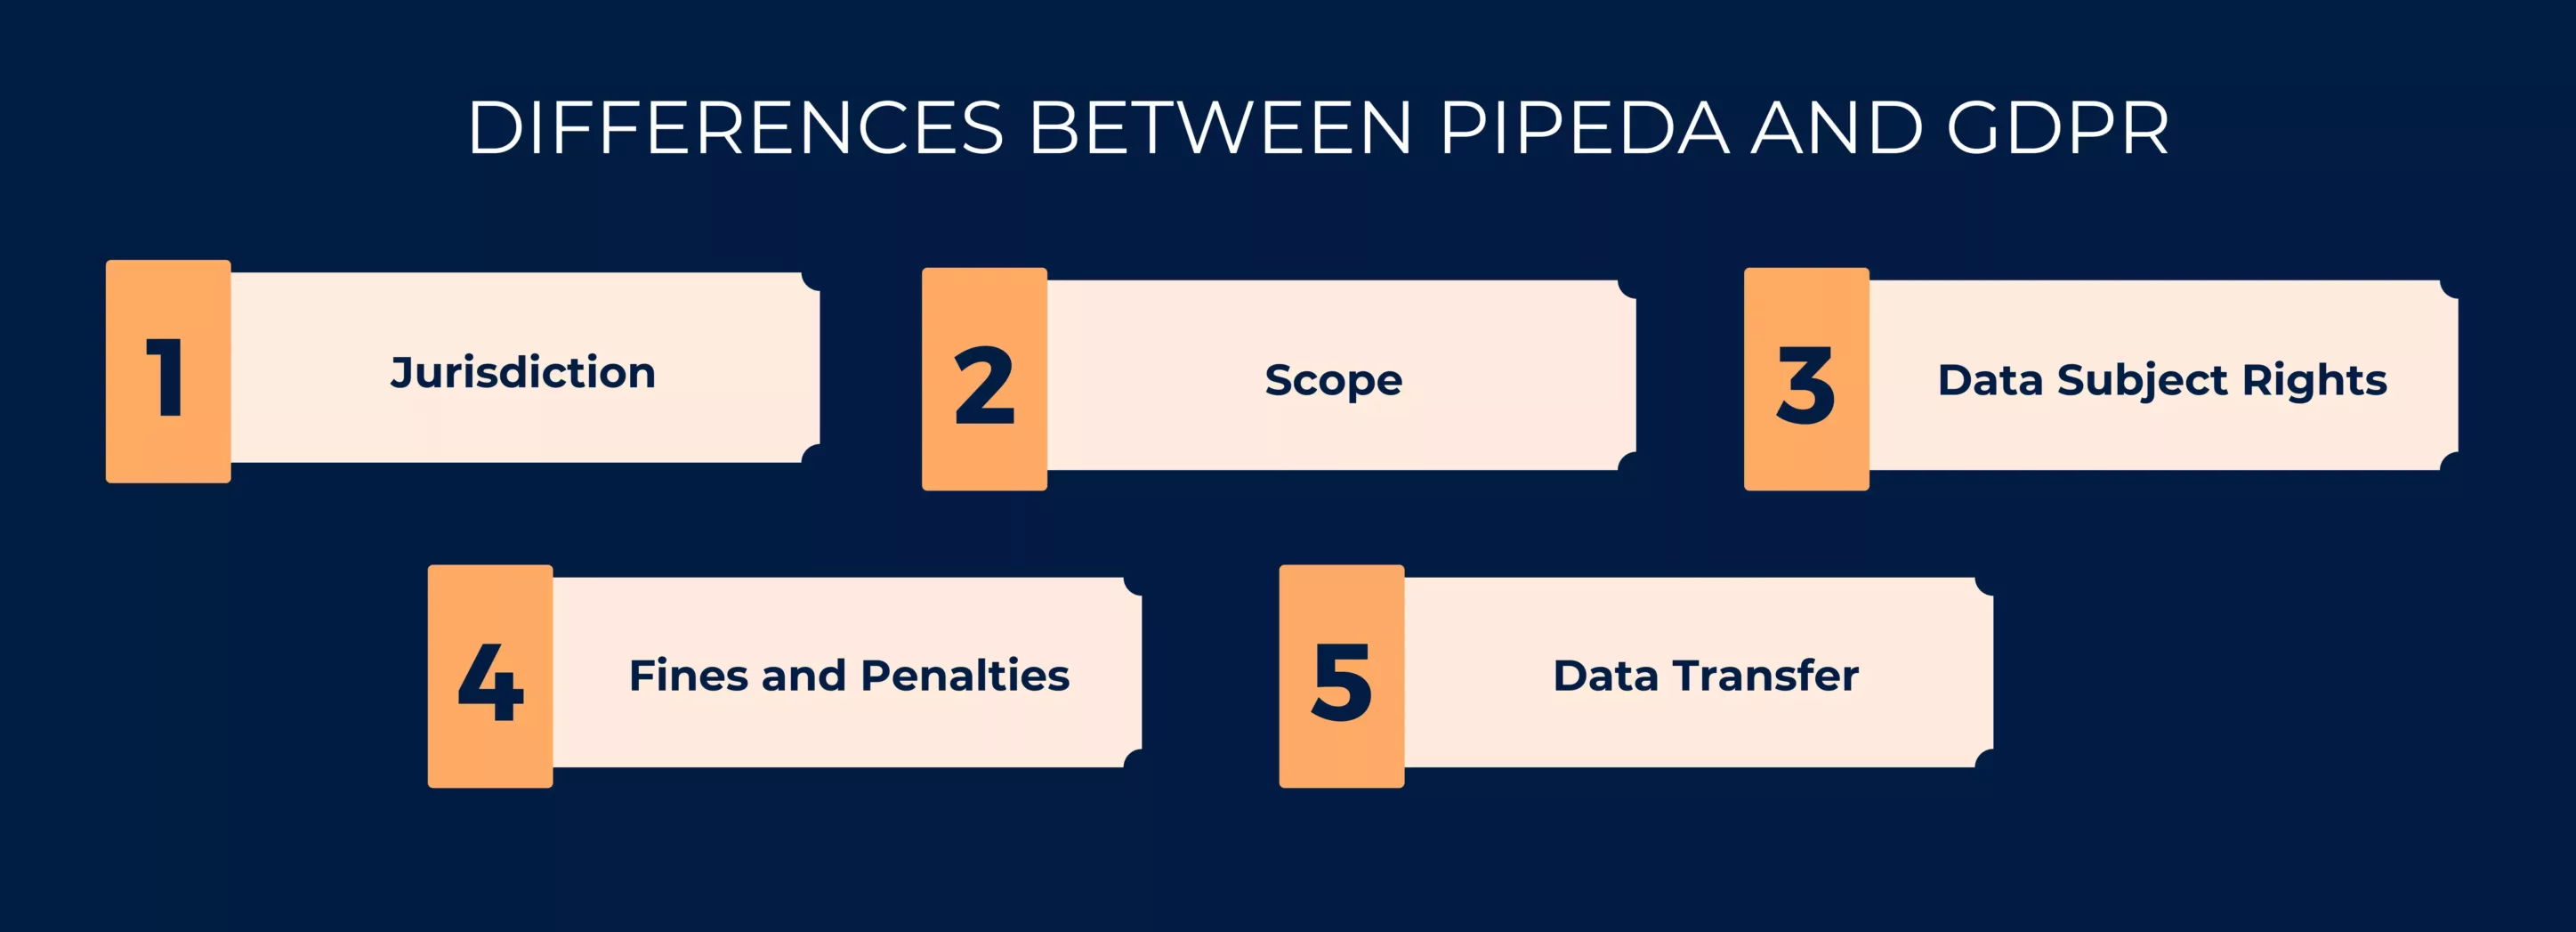 Differences between PIPEDA and GDPR